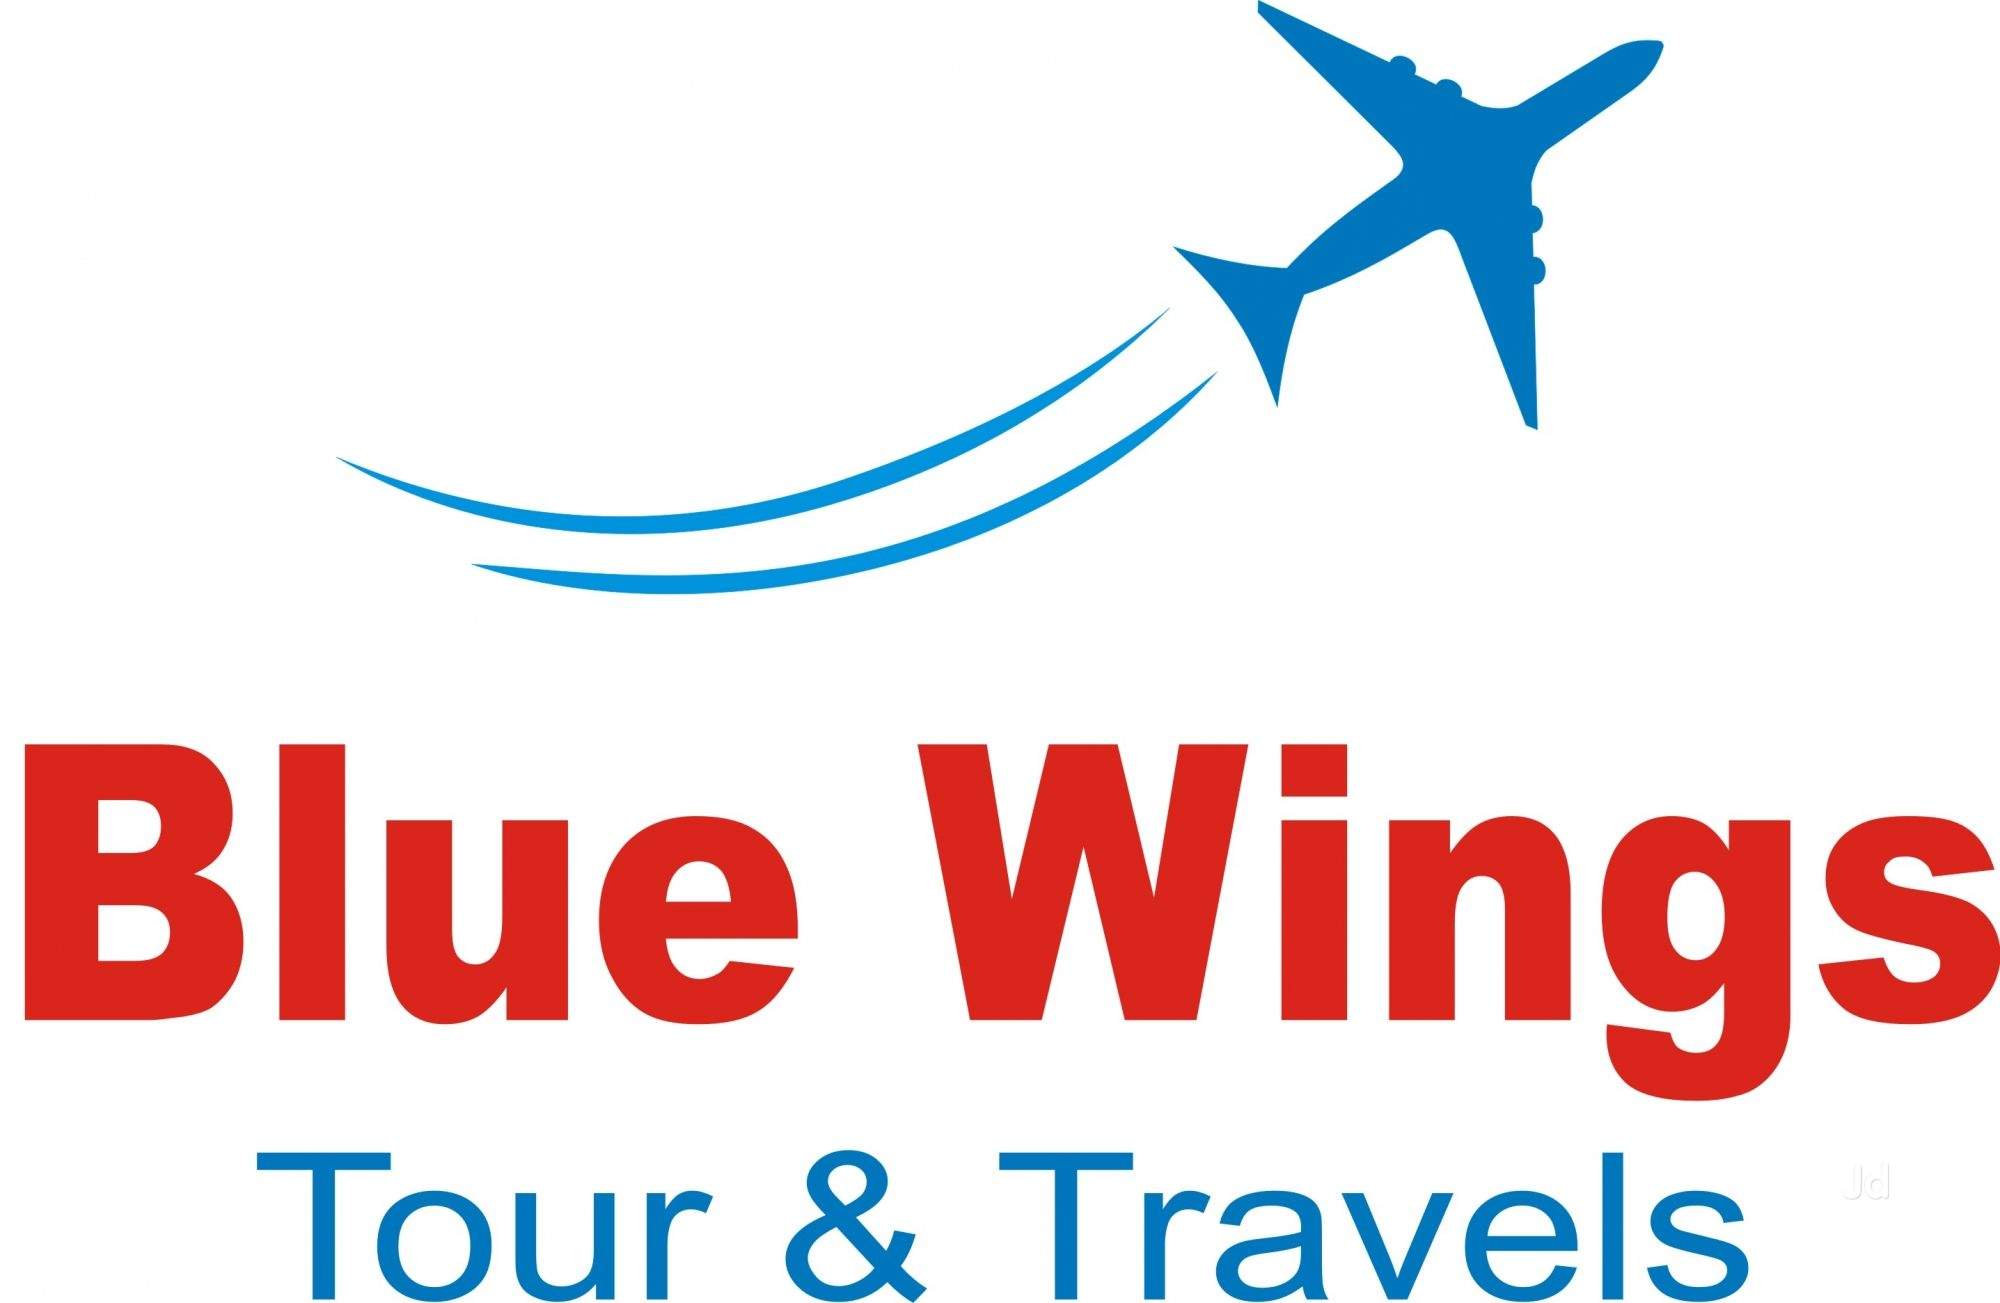 Blue Wings Logo - Blue Wings Tour Travels Photos, Nhbc Panipat, Panipat- Pictures ...